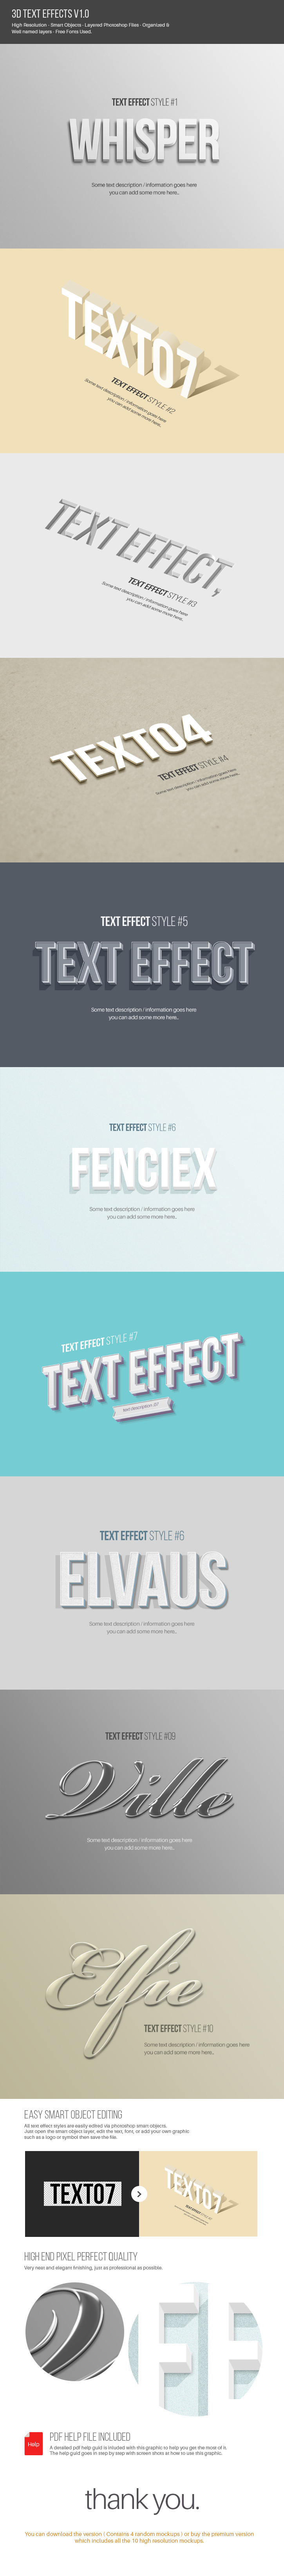 text 3D Style design download psd smart objects Isometric Perspective